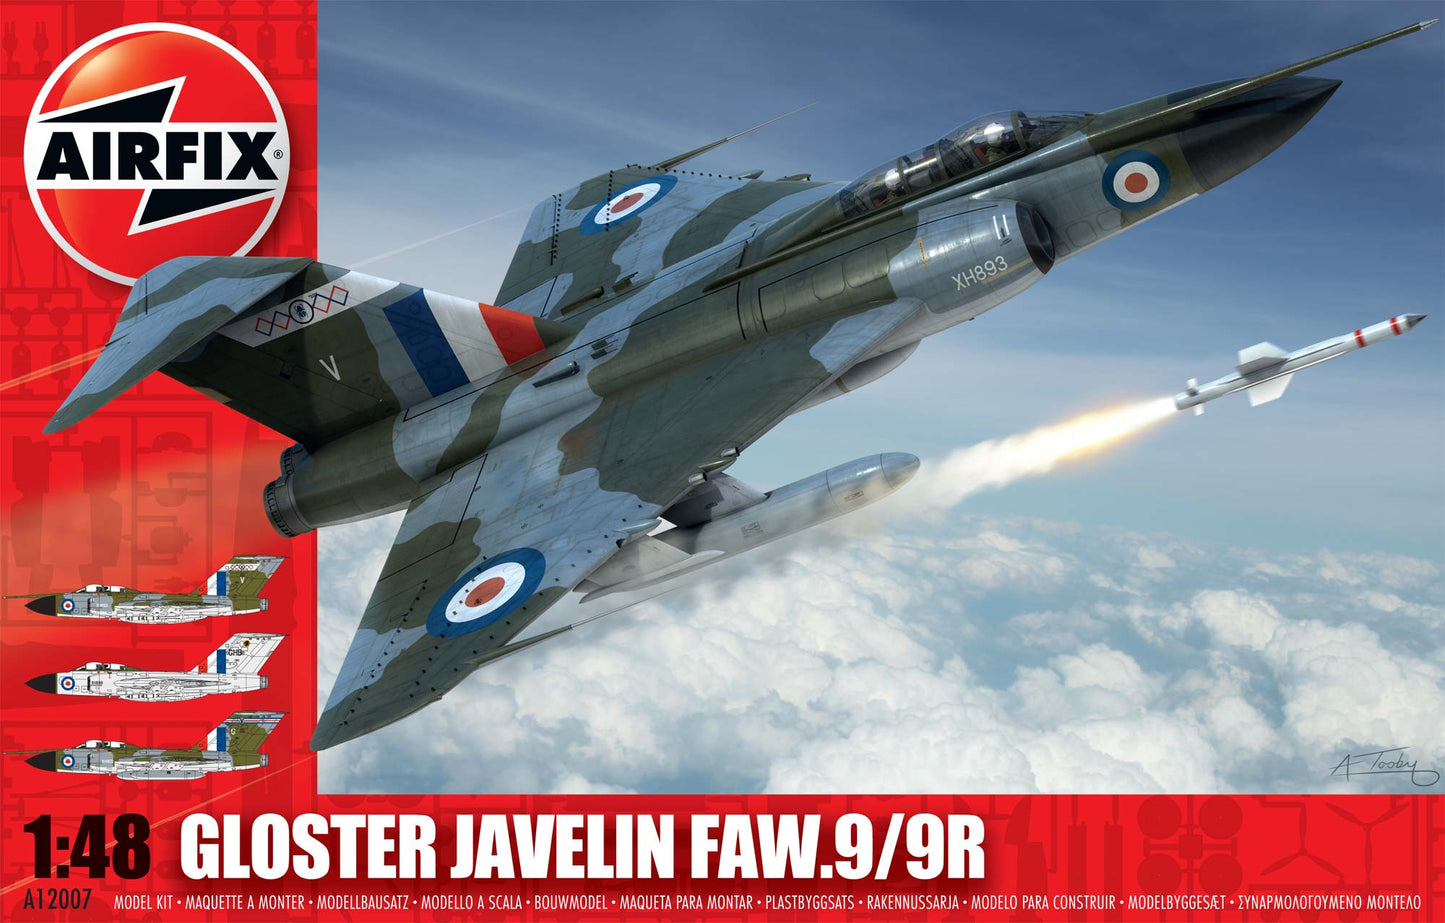 Gloster Javelin FAW.9/9R - AIRFIX 1/48